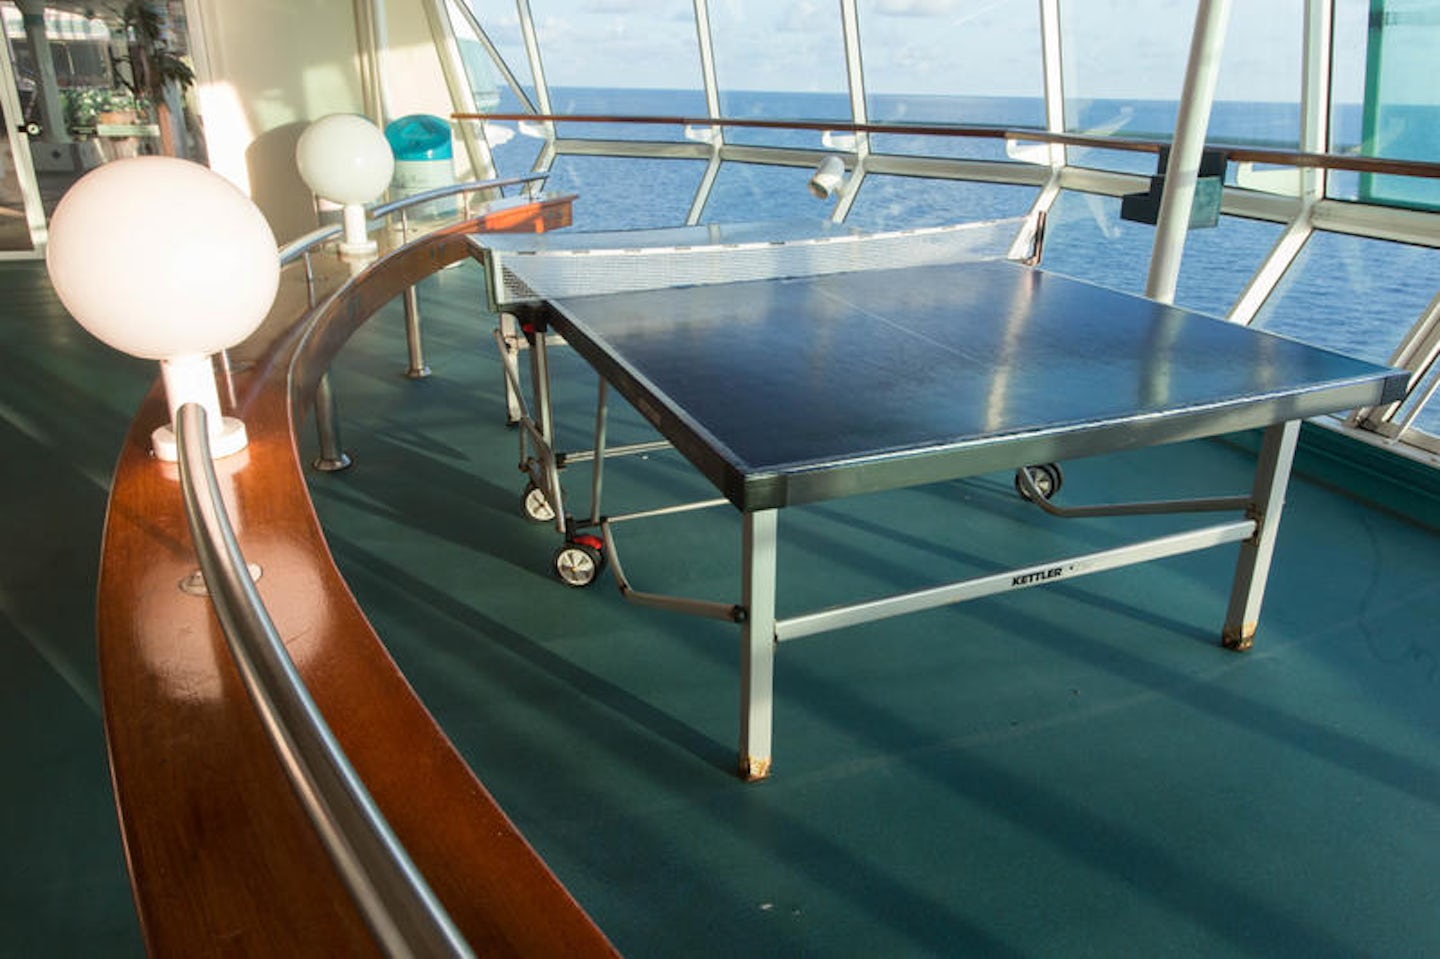 Sport Areas on Enchantment of the Seas